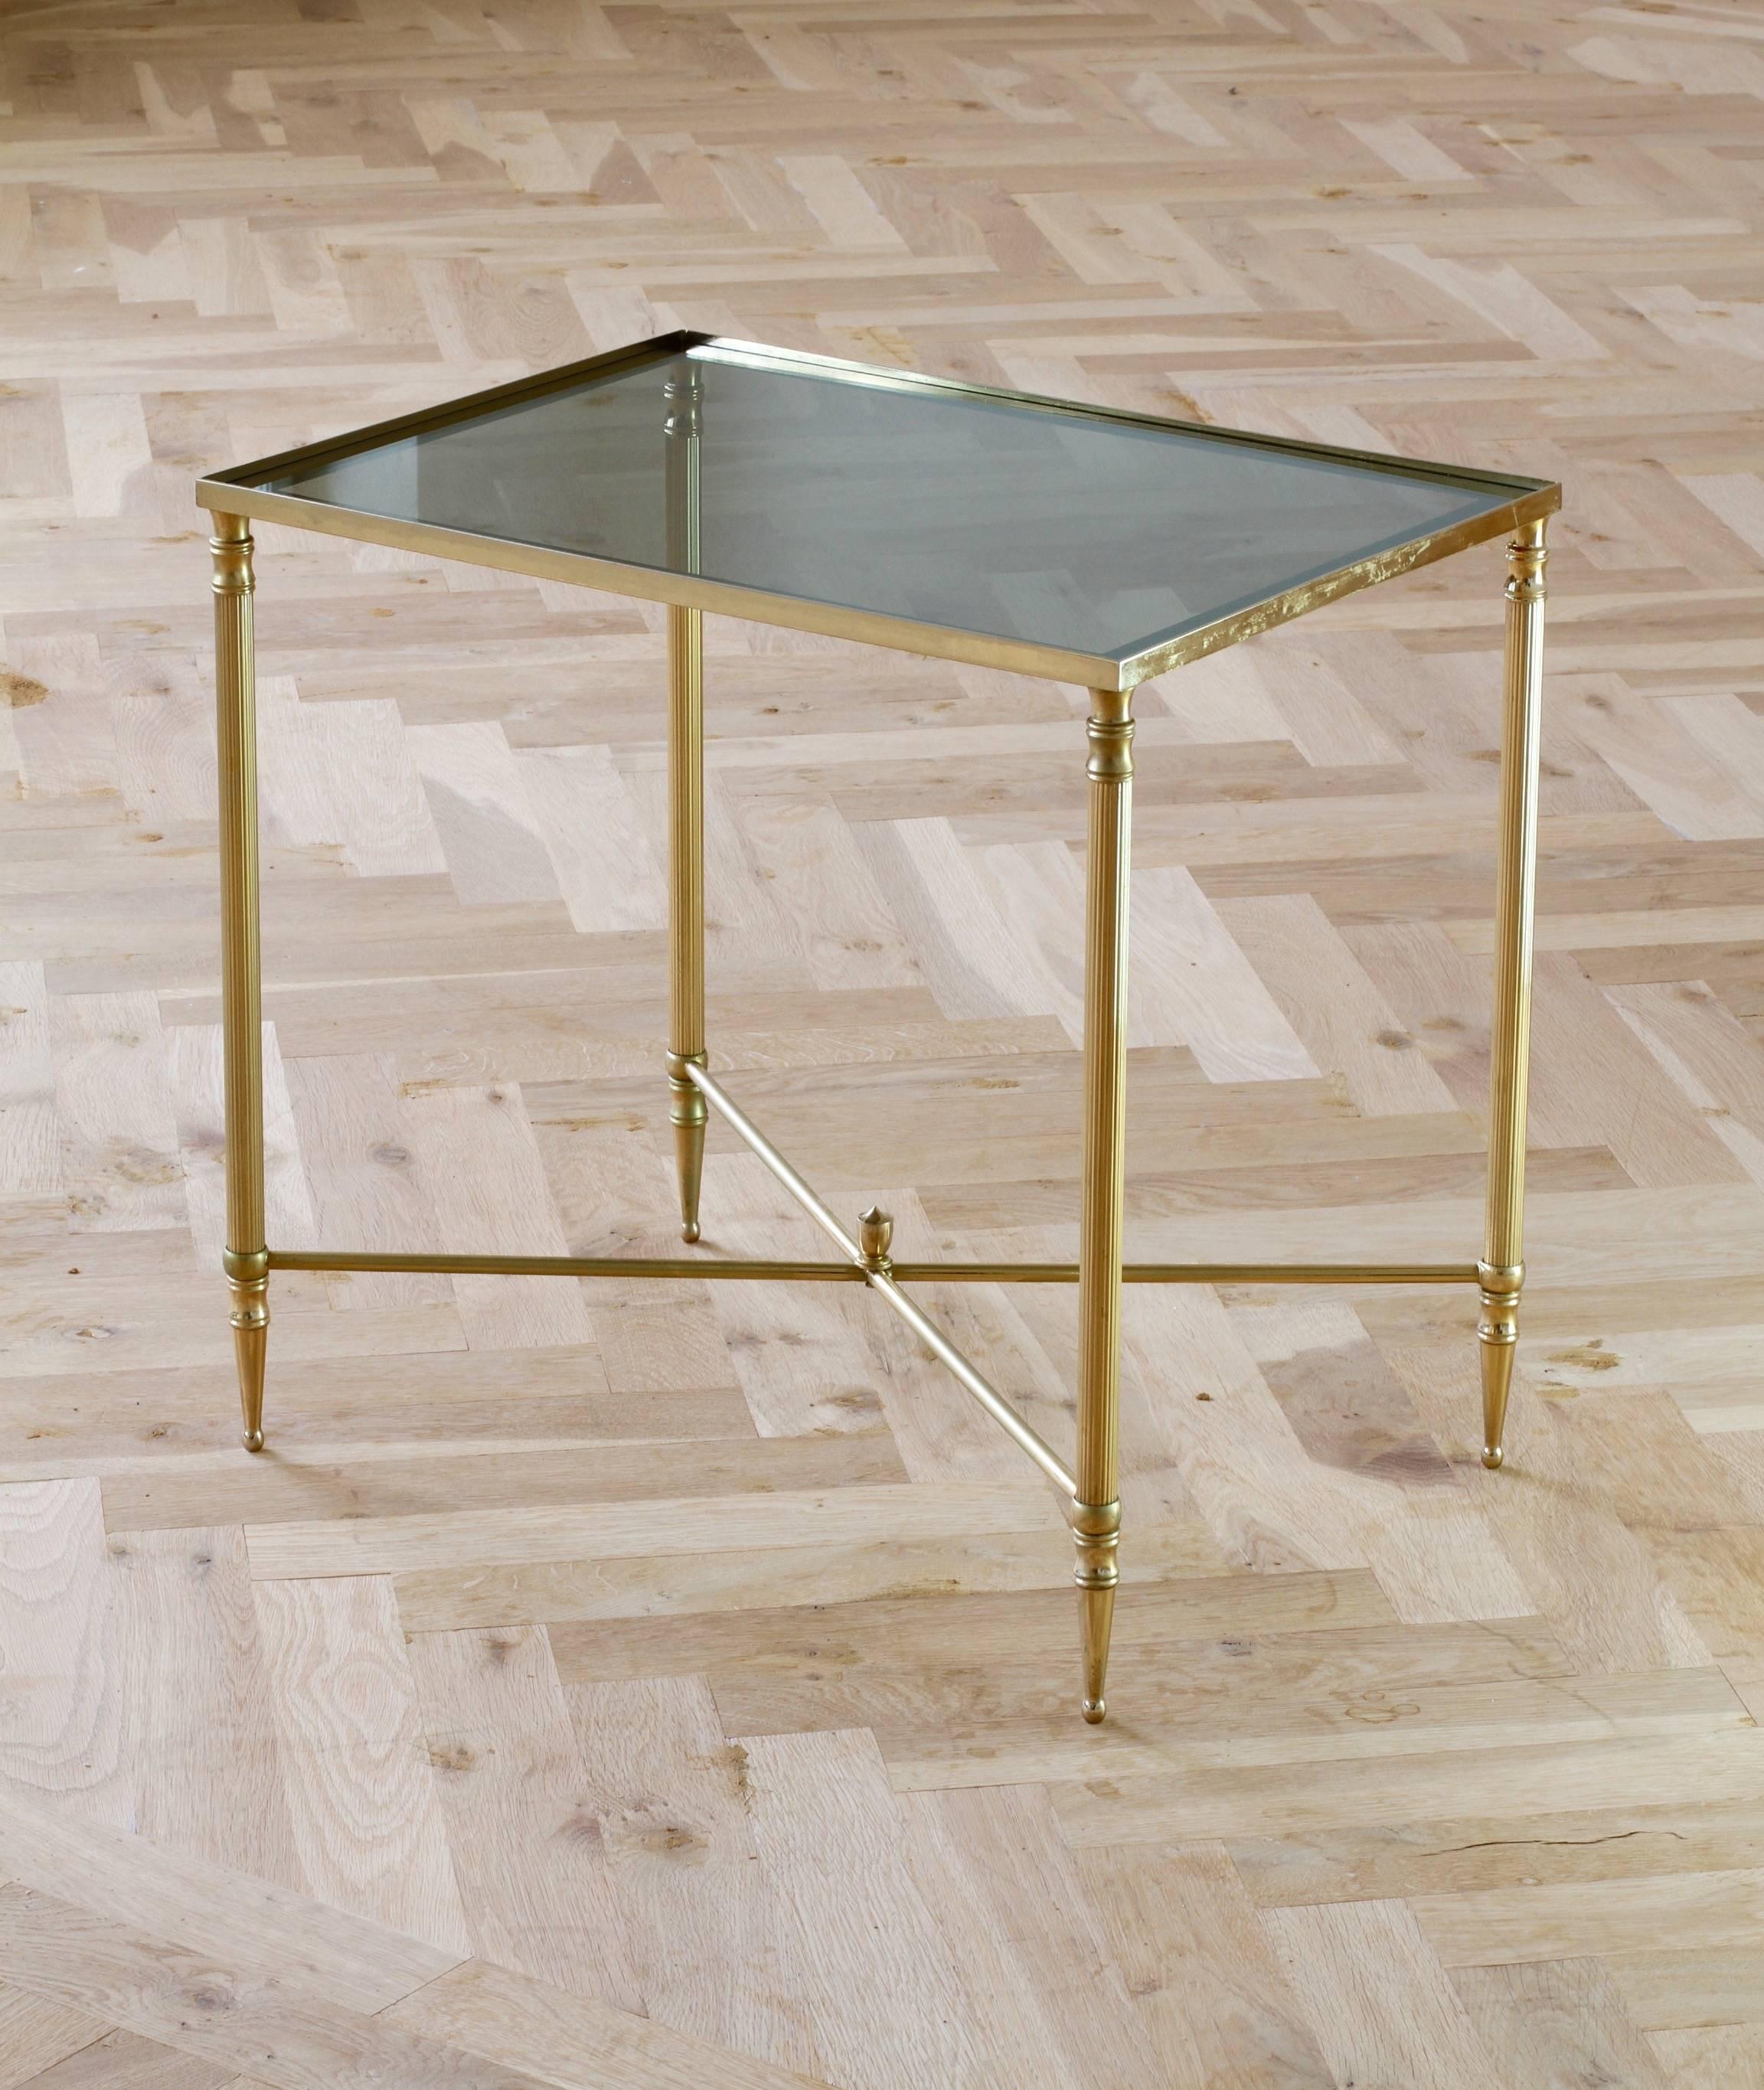 A wonderful tall side or end table attributed to Maison Jansen, circa 1970. Made from solid brass in the neoclassical style and featuring a dark toned smoked glass tabletop with a mirrored border. This delightful table, not dissimilar to designs by